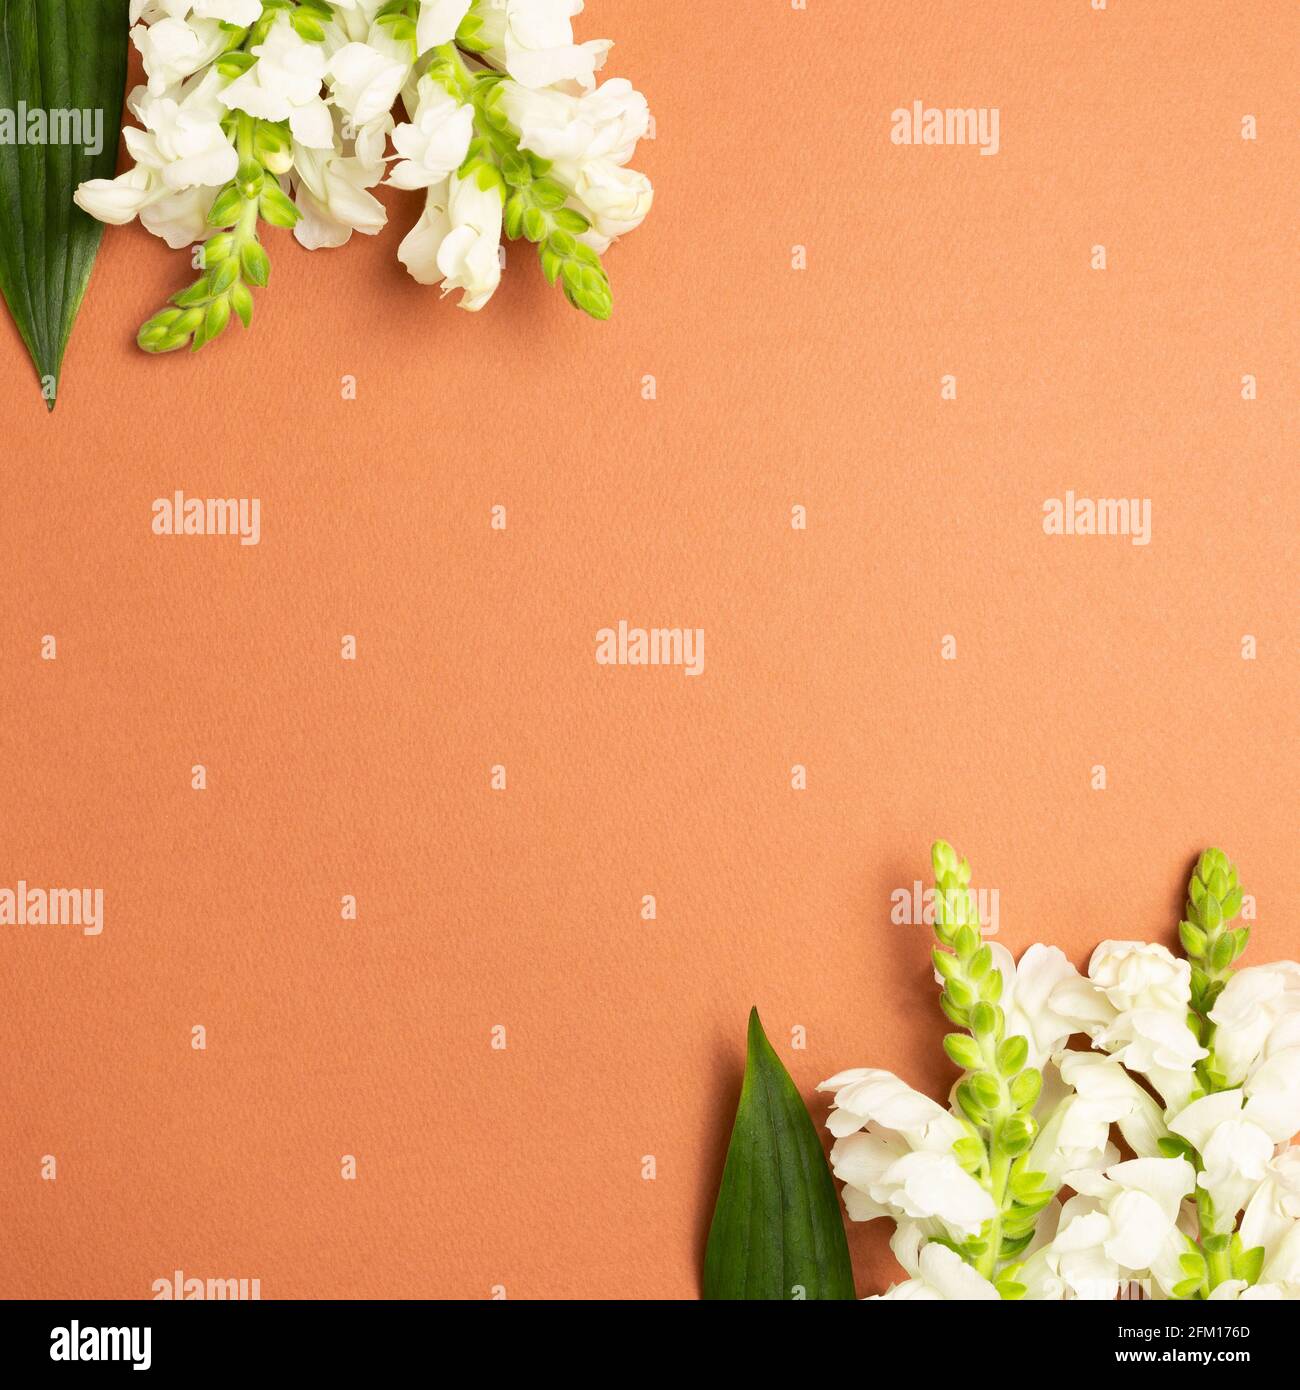 White snapdragon flowers on red brown background. flat lay, top view, copy space Stock Photo